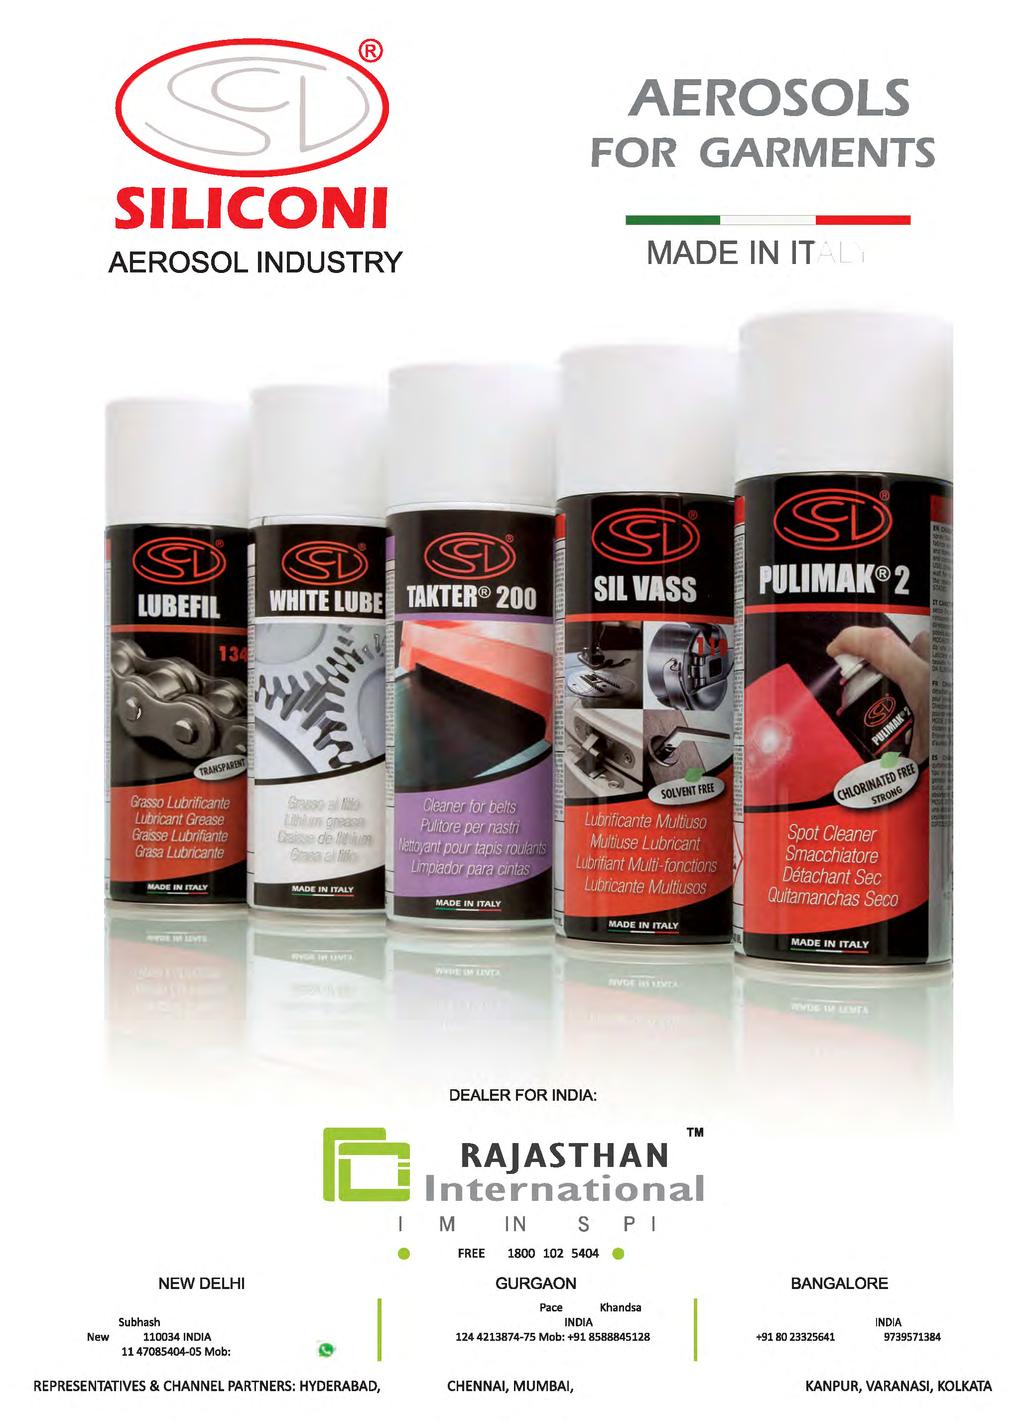 SILICON I AEROSOL INDUSTRY AEROSOLS FOR GARMENTS MADE IN ITALY DEALER FOR INDIA: RAJASTHAN International TEXTILE MACHINERY SUPPLIES www.rajasthanintl.